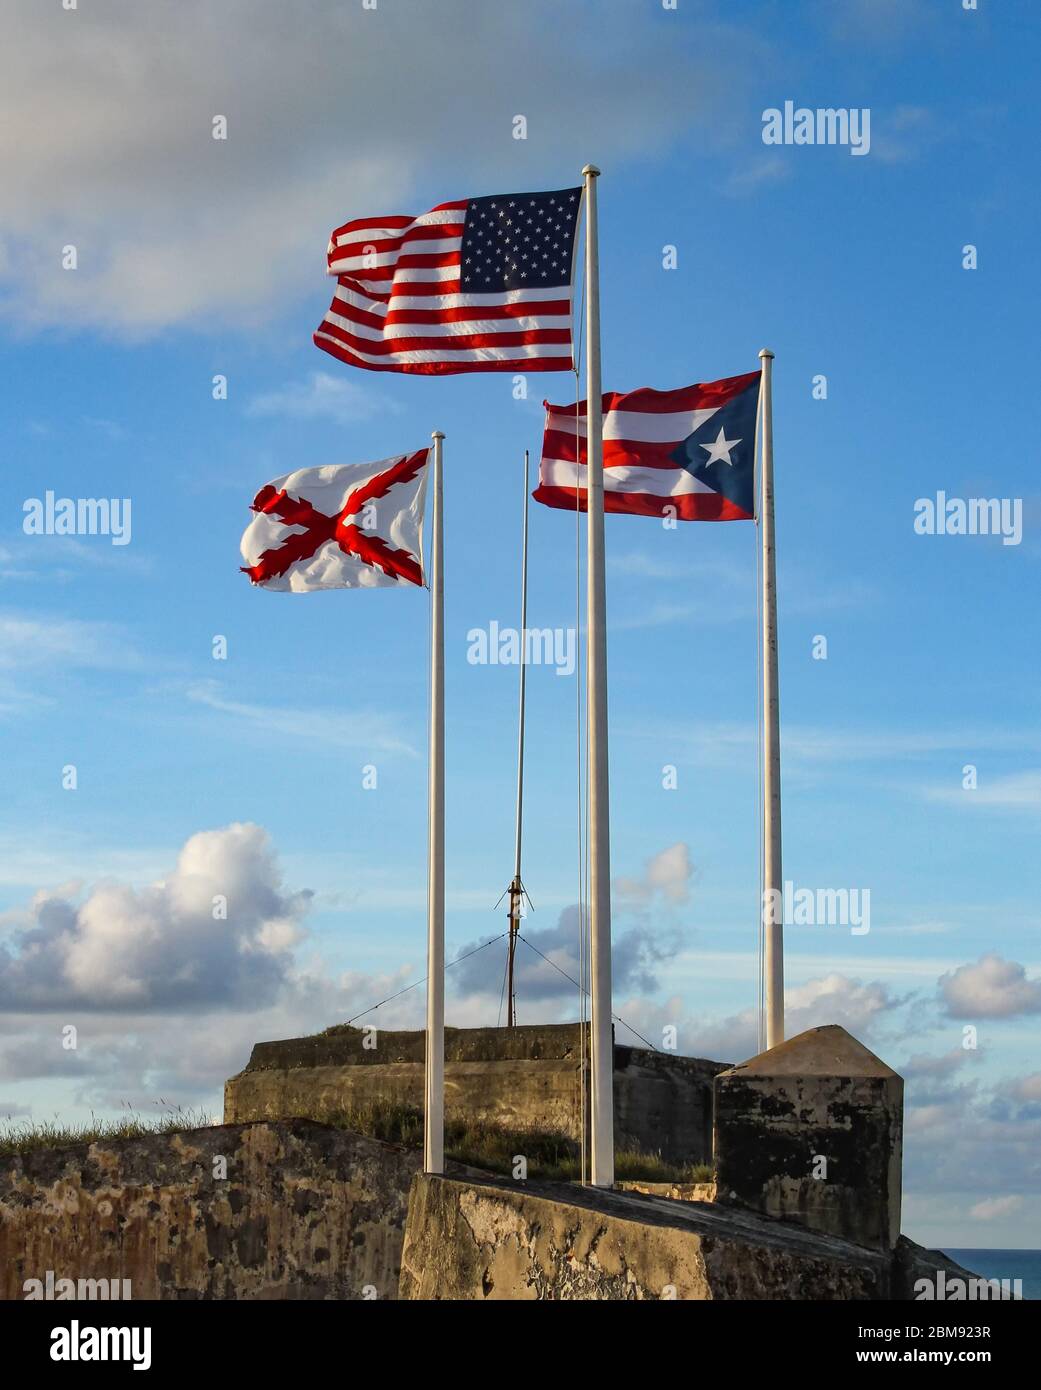 The three flags that fly at El Morro in Old San Juan, Puerto Rico. American, Puerto Rican and Cross of Burgundy flags. Stock Photo